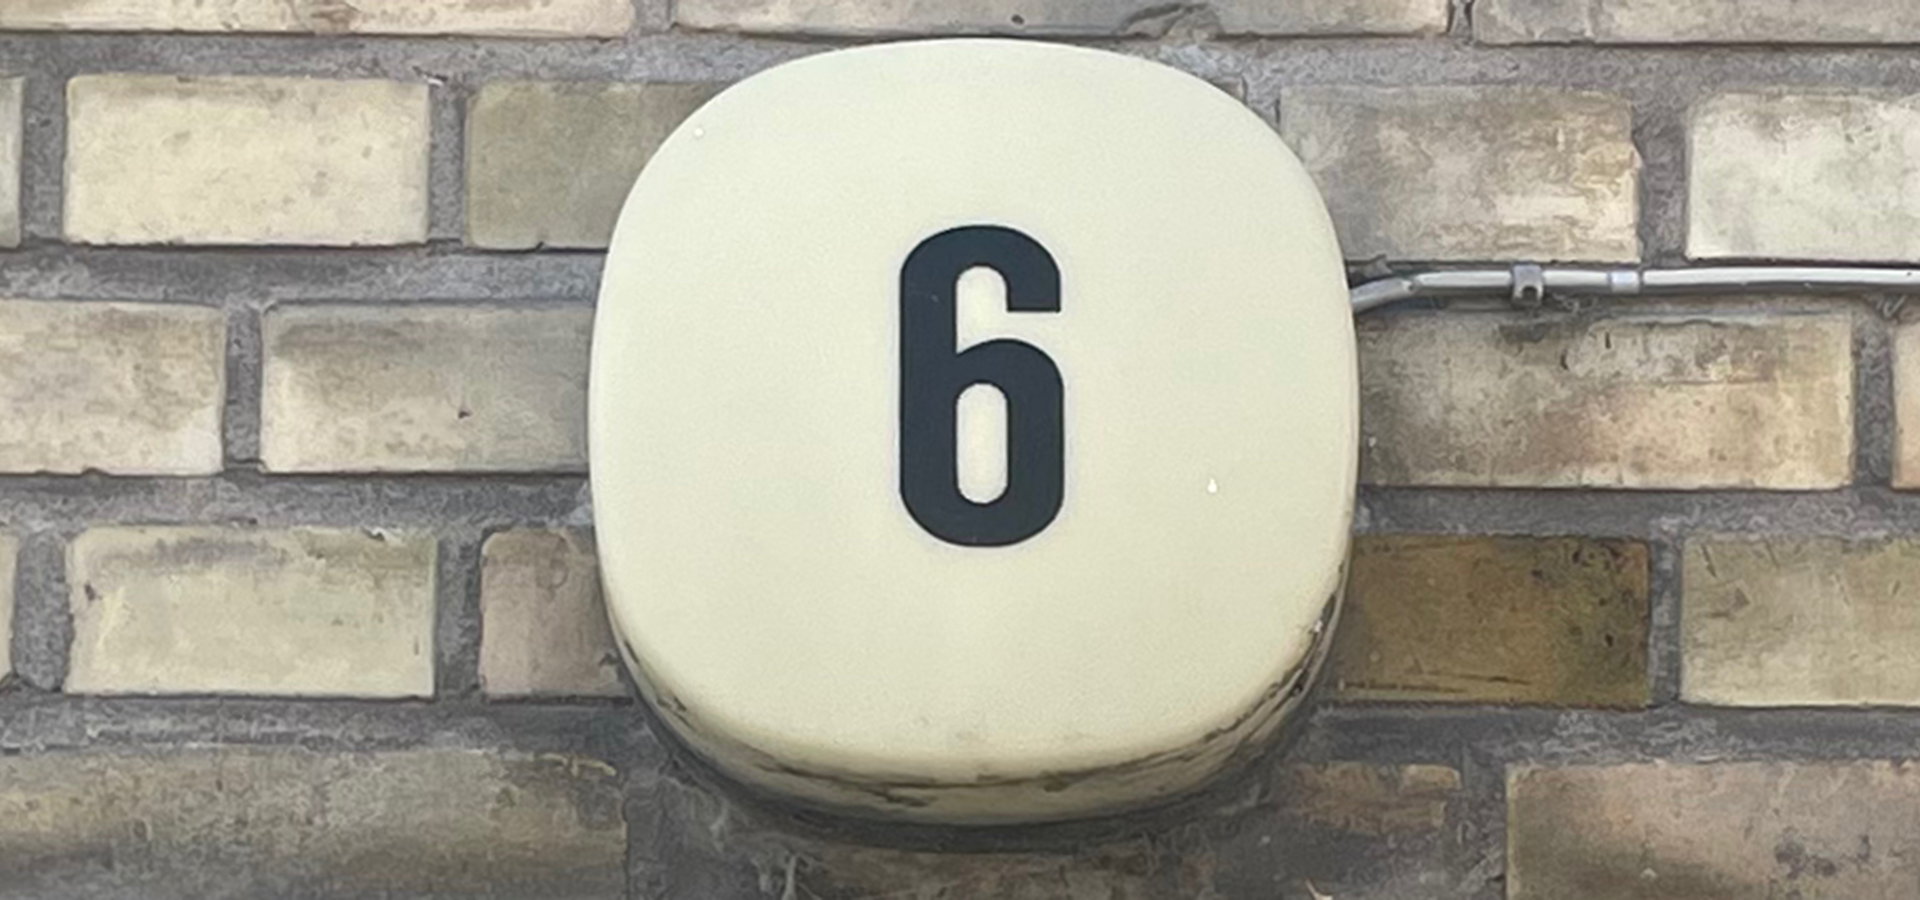  Numerology | Number No. 6